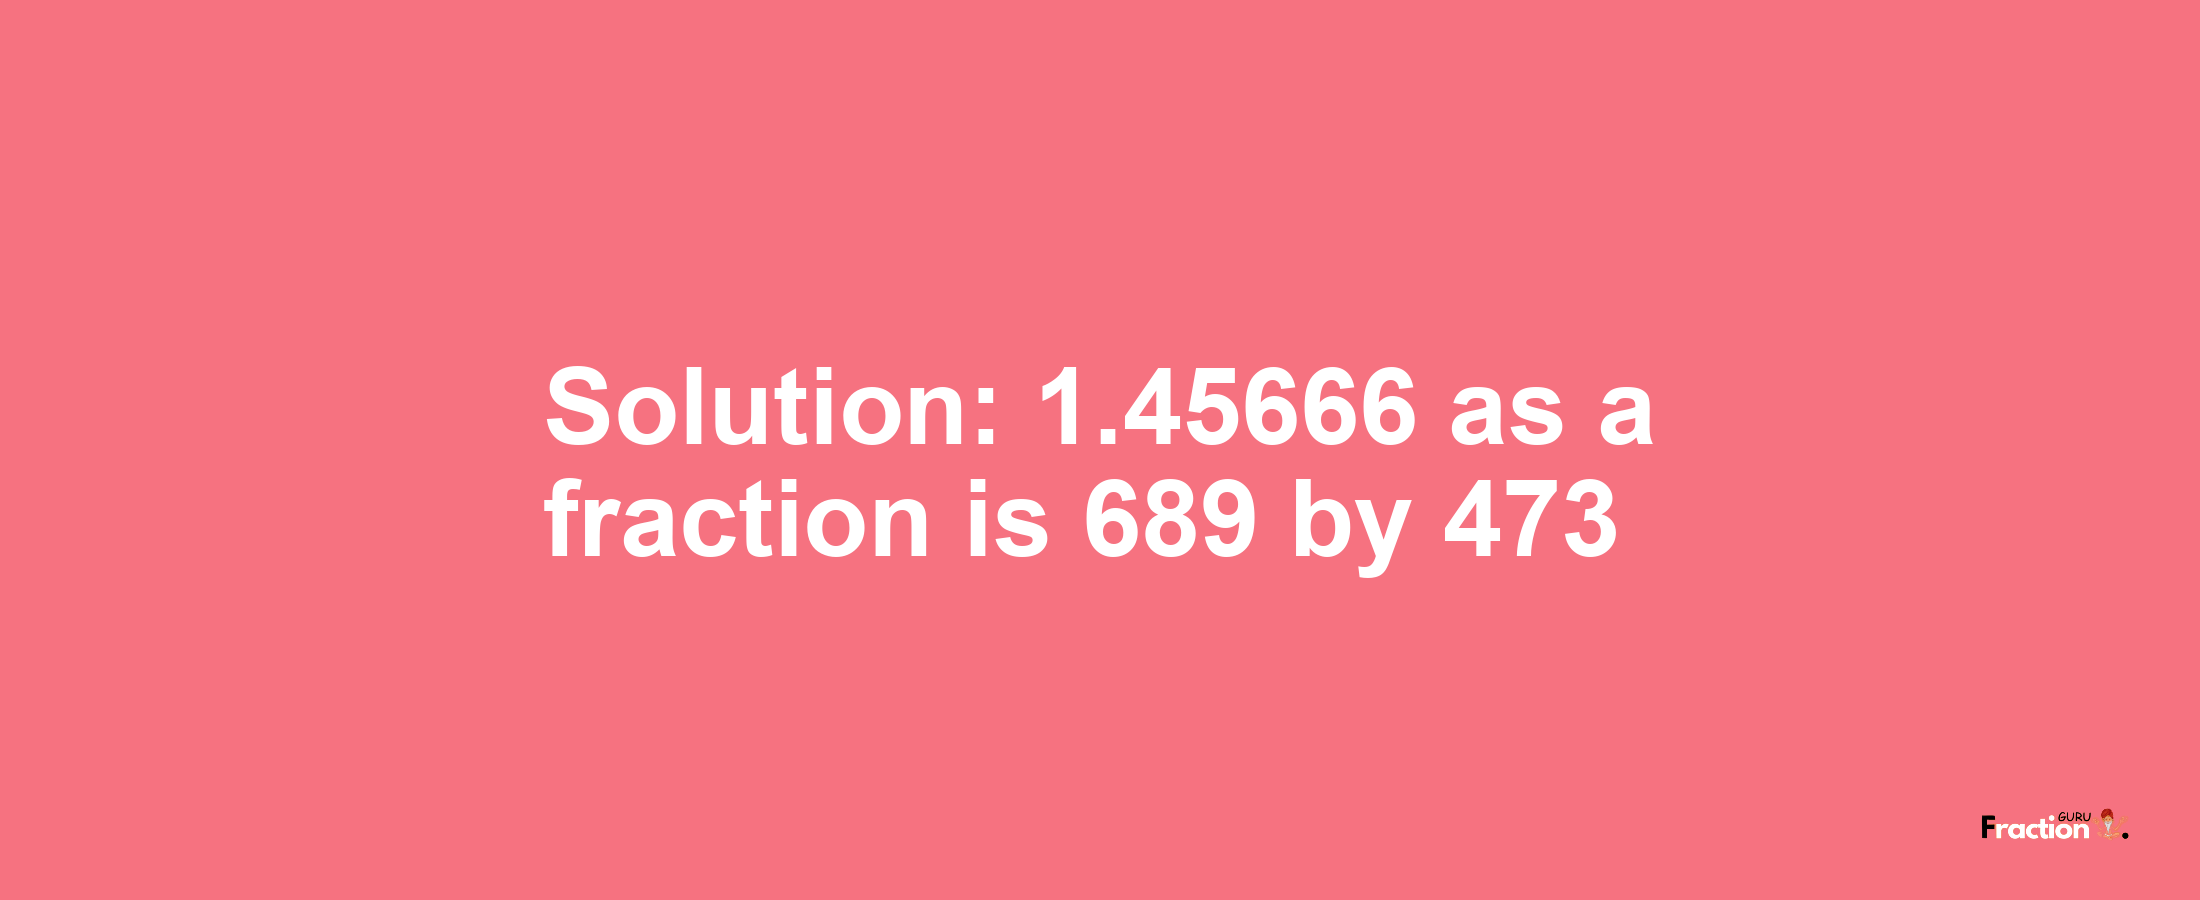 Solution:1.45666 as a fraction is 689/473